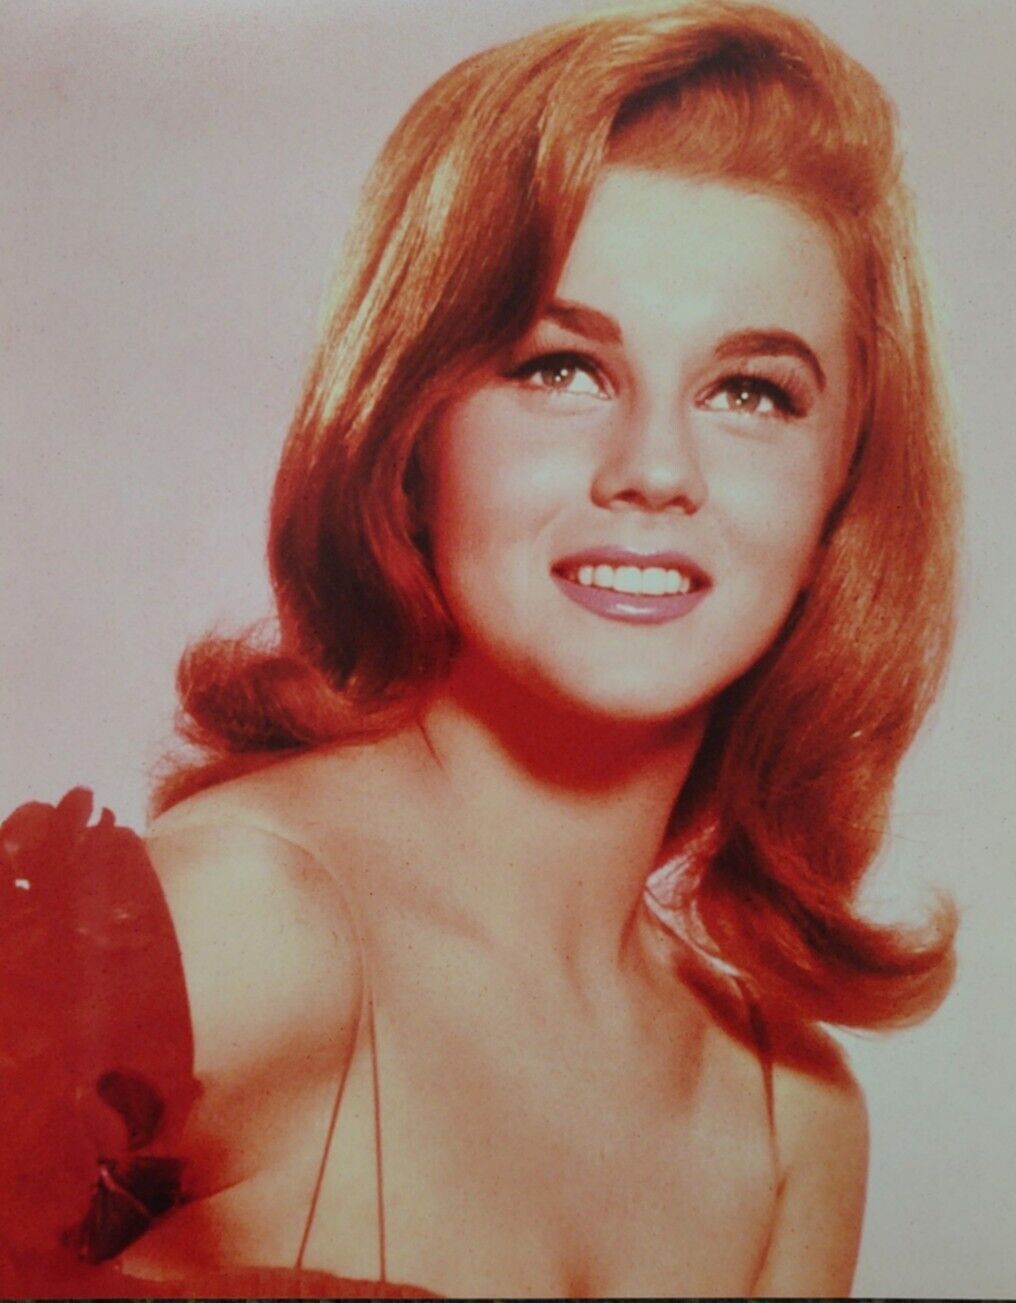 Rare Vintage Color 8x10 Photo ANN-MARGRET Stunning Sexy Swedish Actress